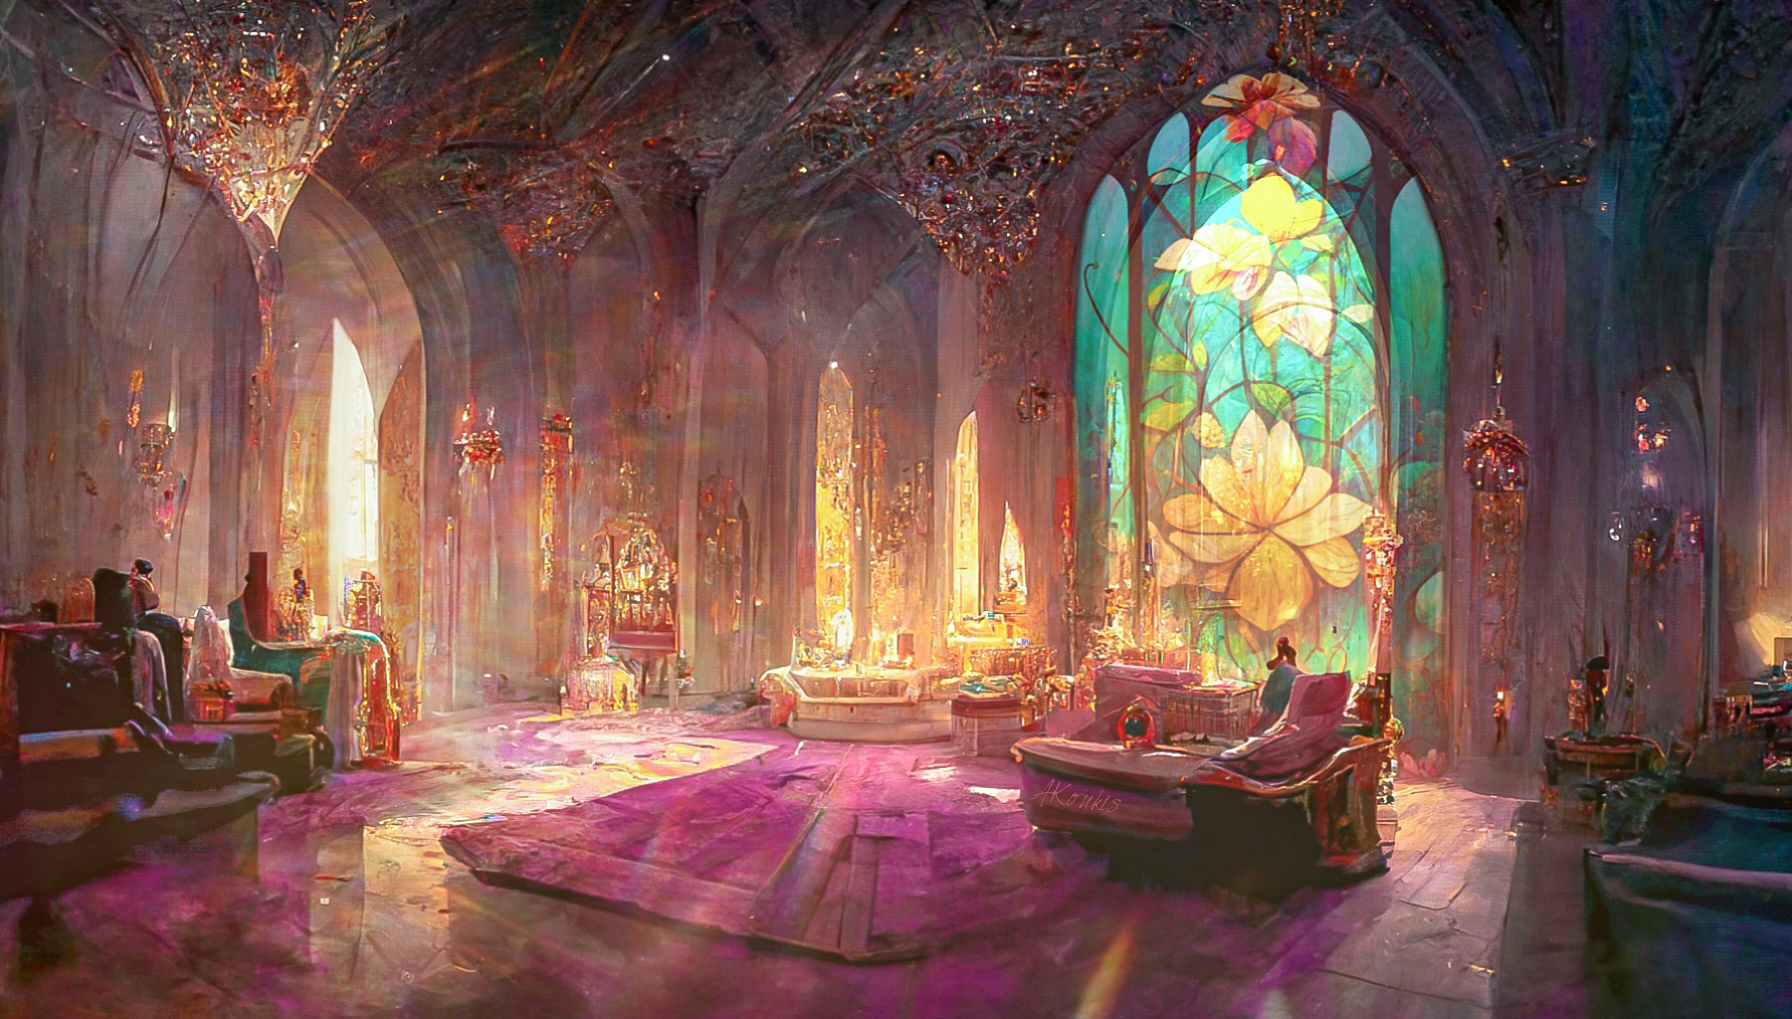 Environment Concept - Royal Bedroom (East Side) by AKoukis on DeviantArt